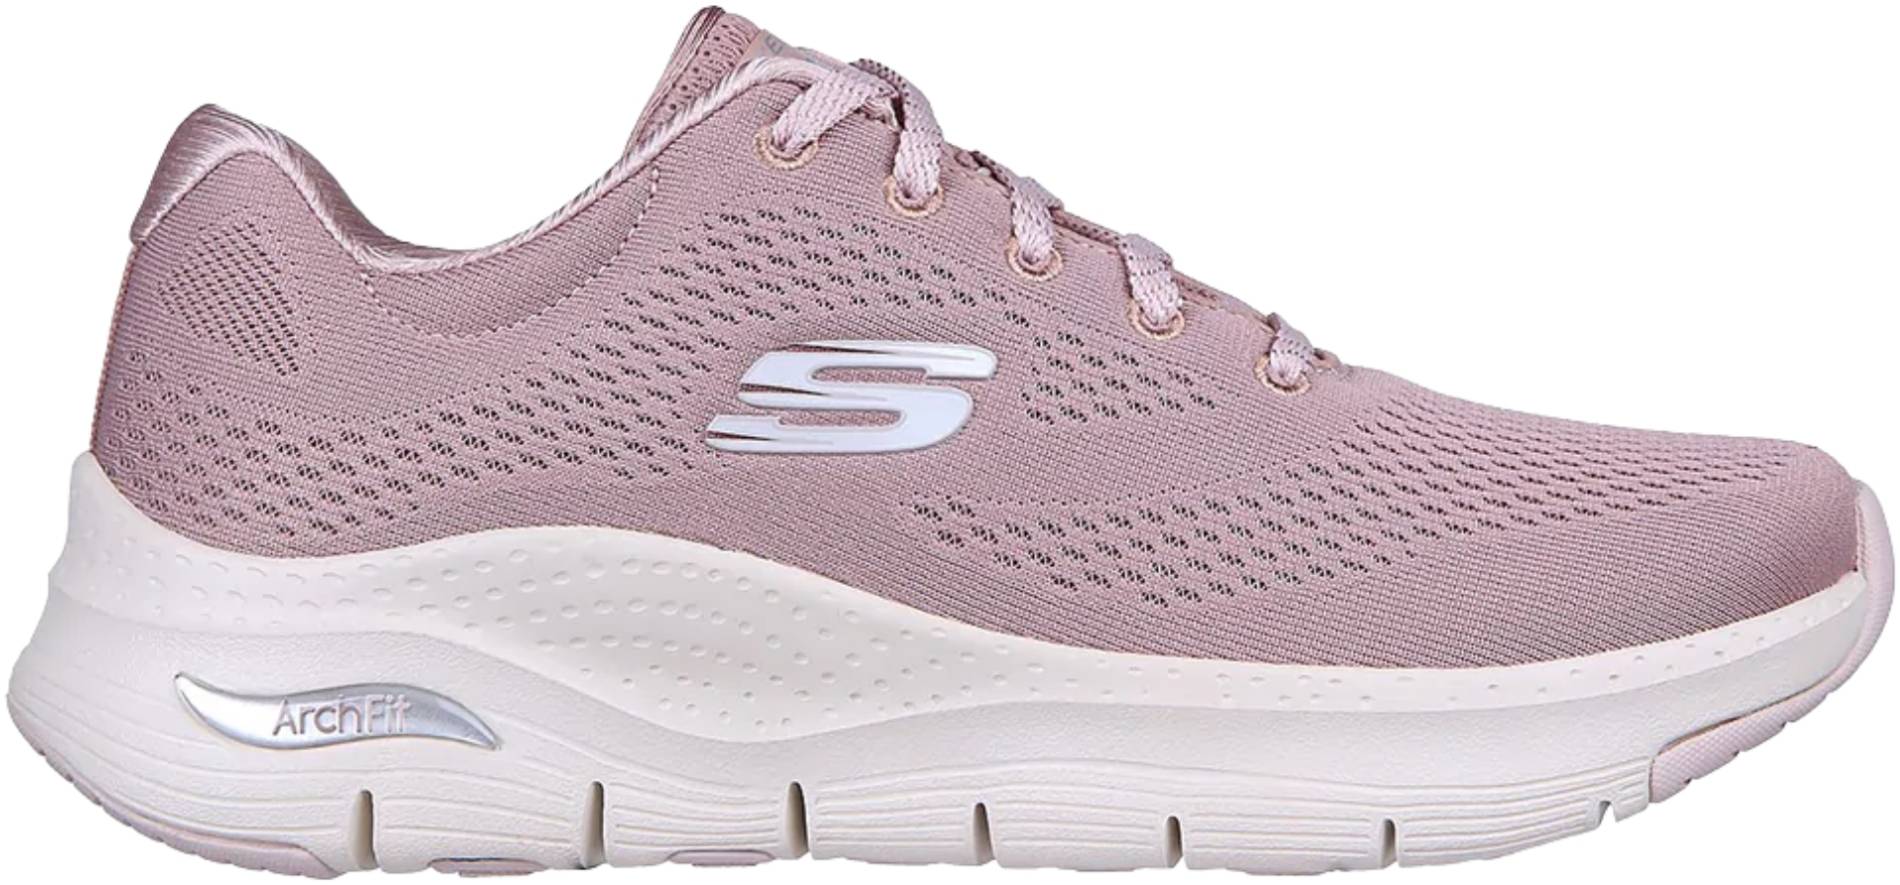 Are Skechers Arch Fit True to Size?